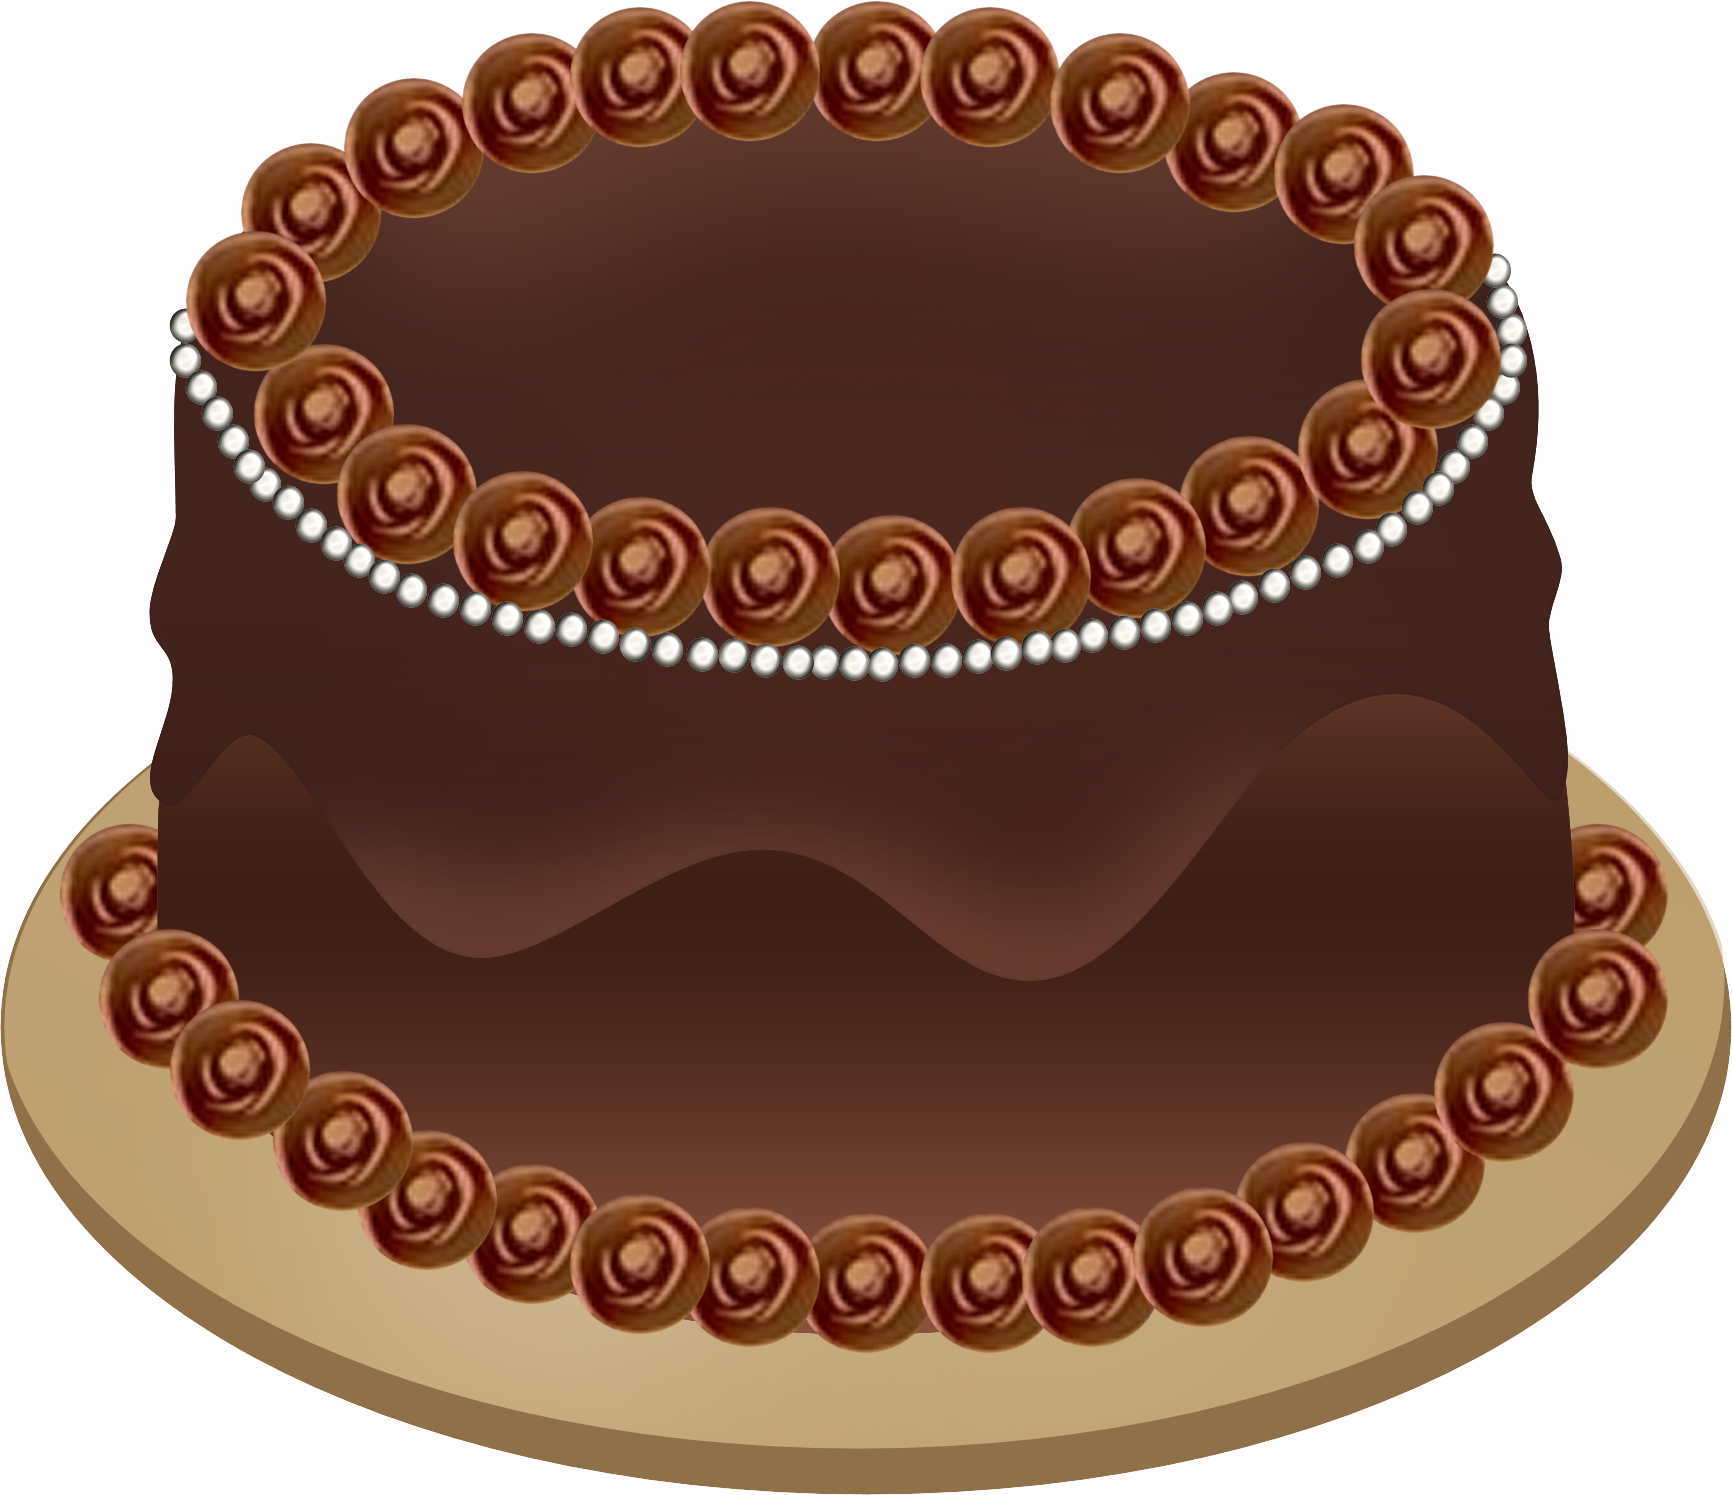 An Illustrated Birthday Cake Graphic Click The Image To View And